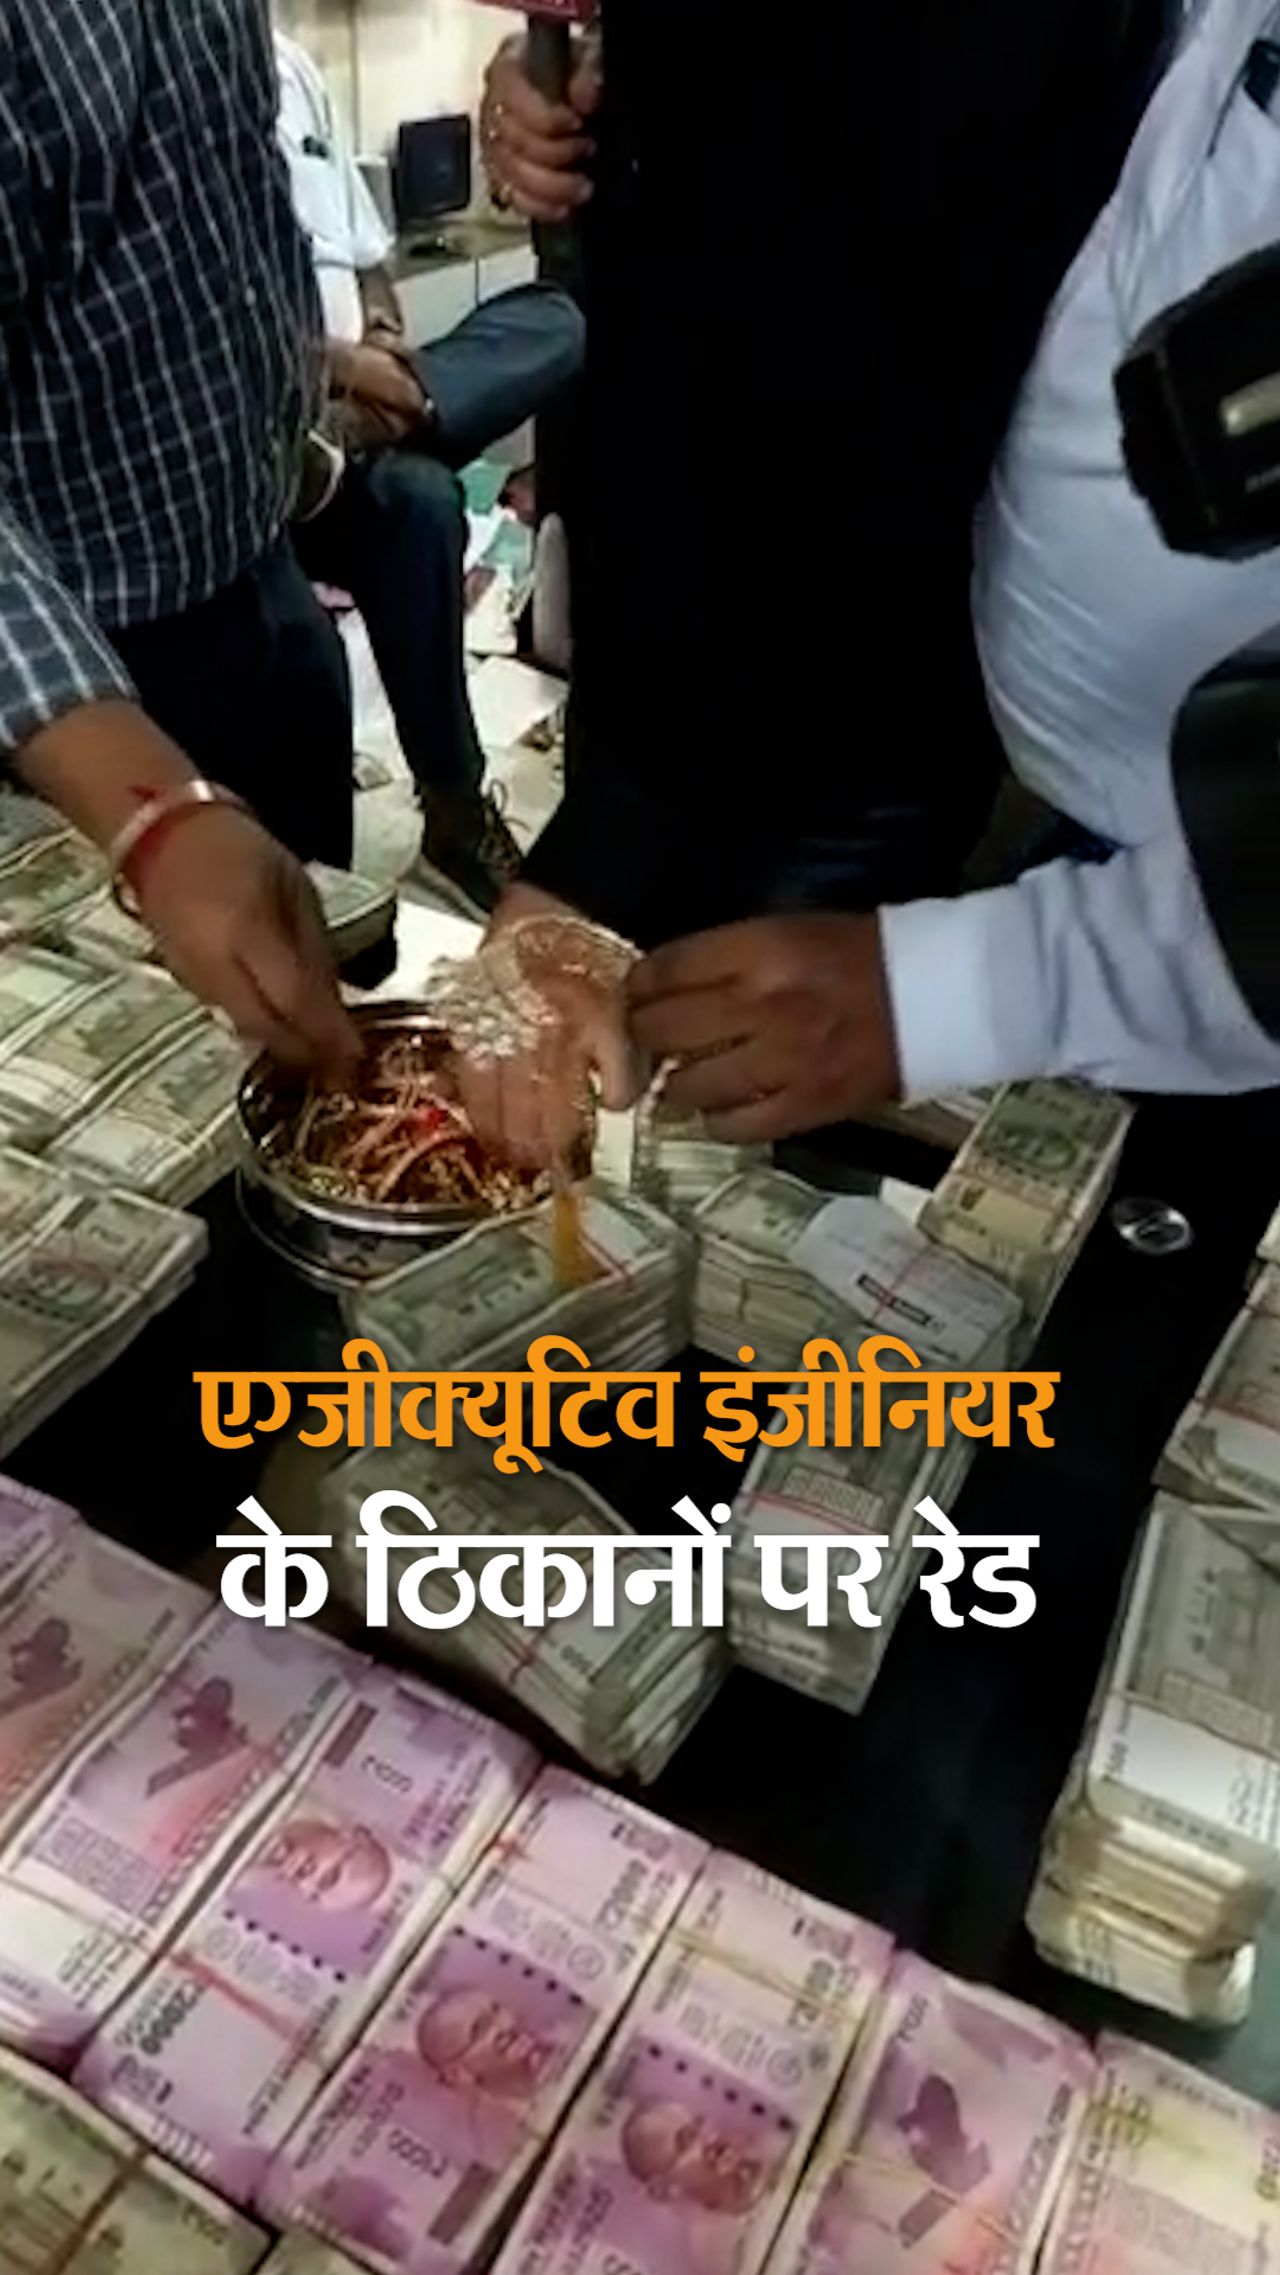 More than 5 crore cash recovered from the premises of the Executive Engineer of Rural Development Department